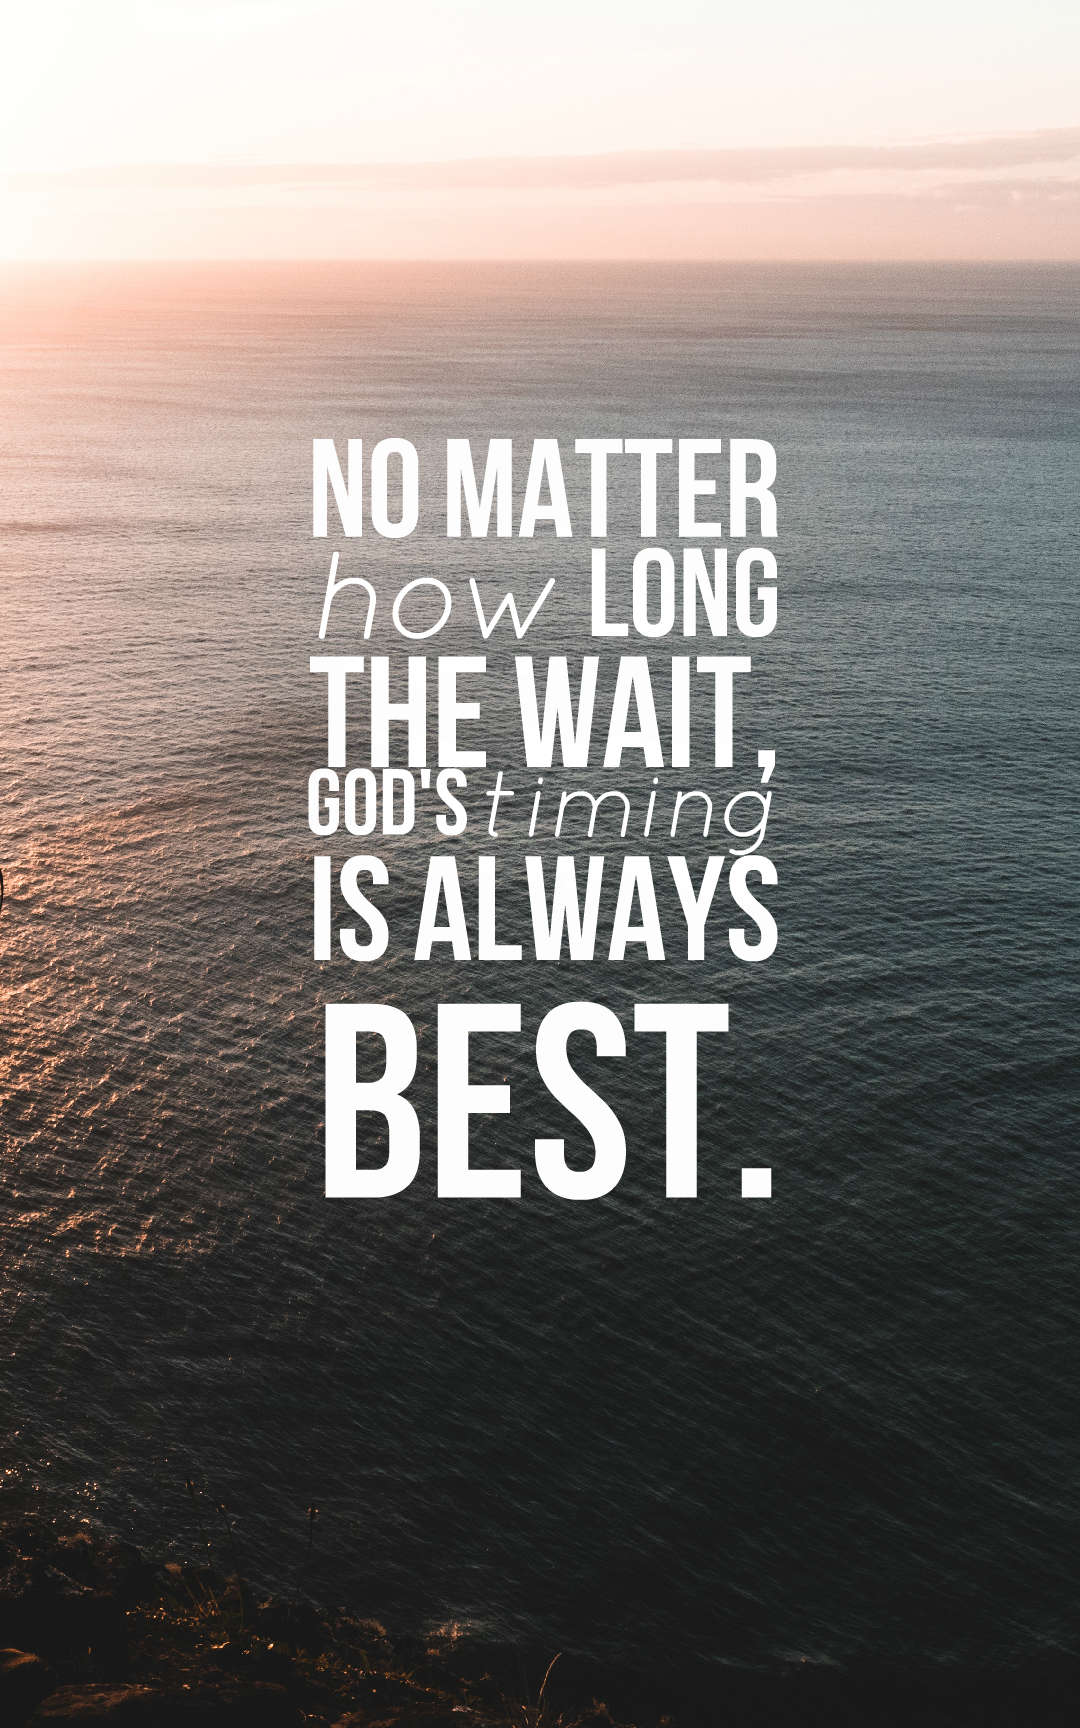 No matter how long the wait, God's timing is always best.